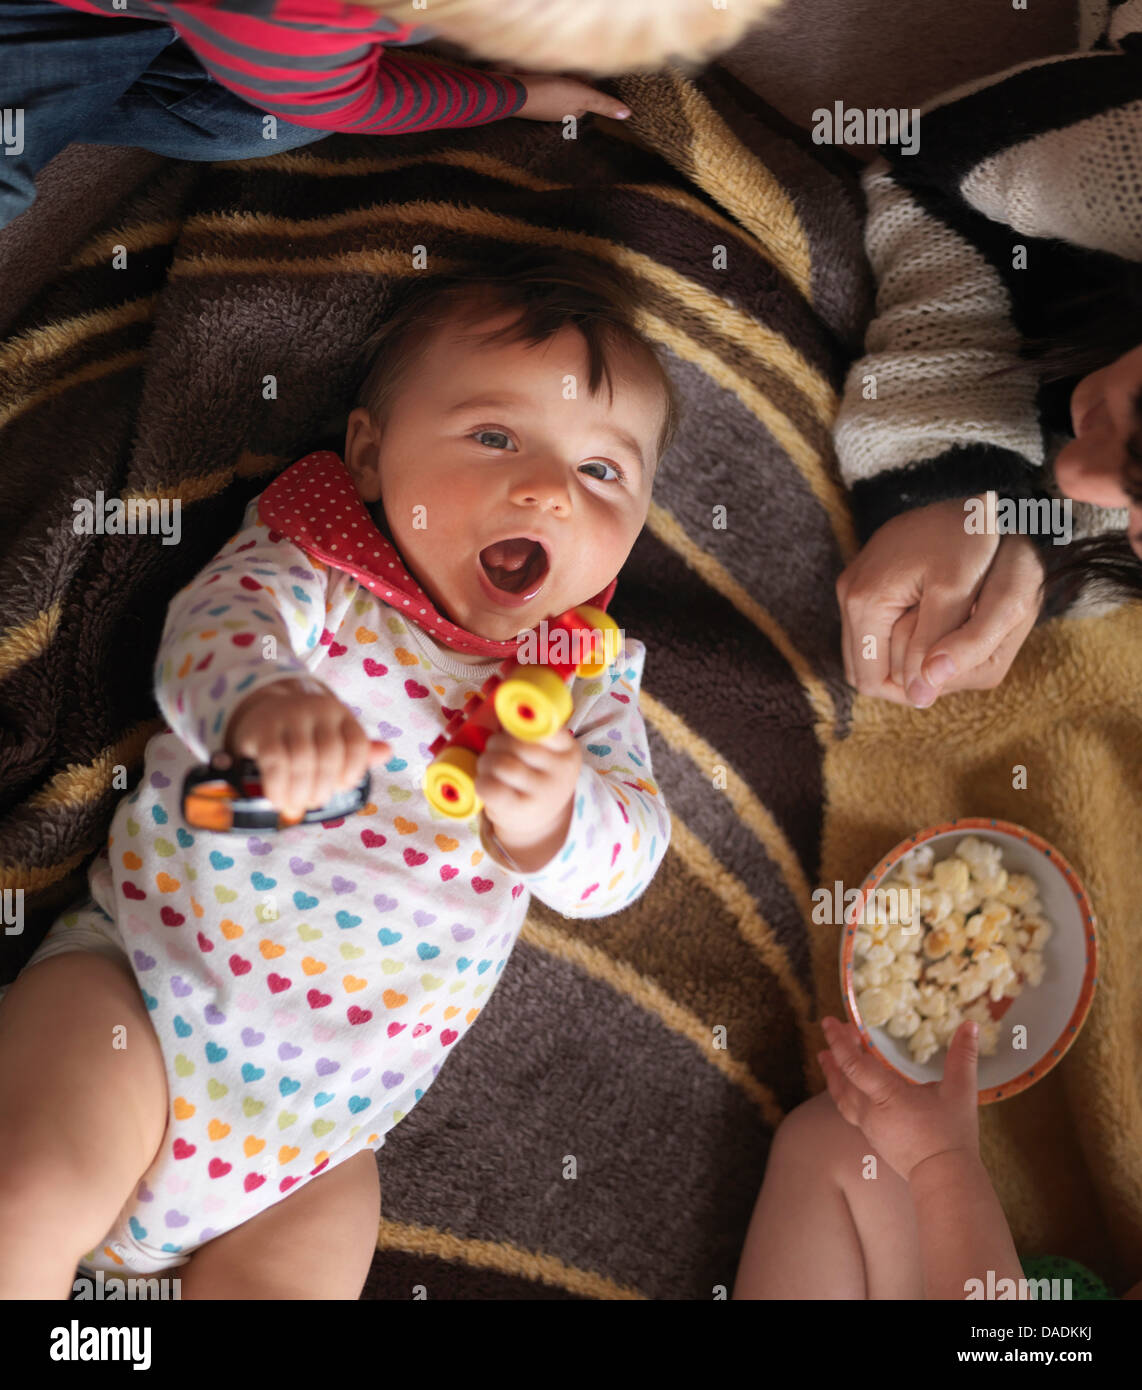 Baby holding toys and lying on back, overhead view Stock Photo